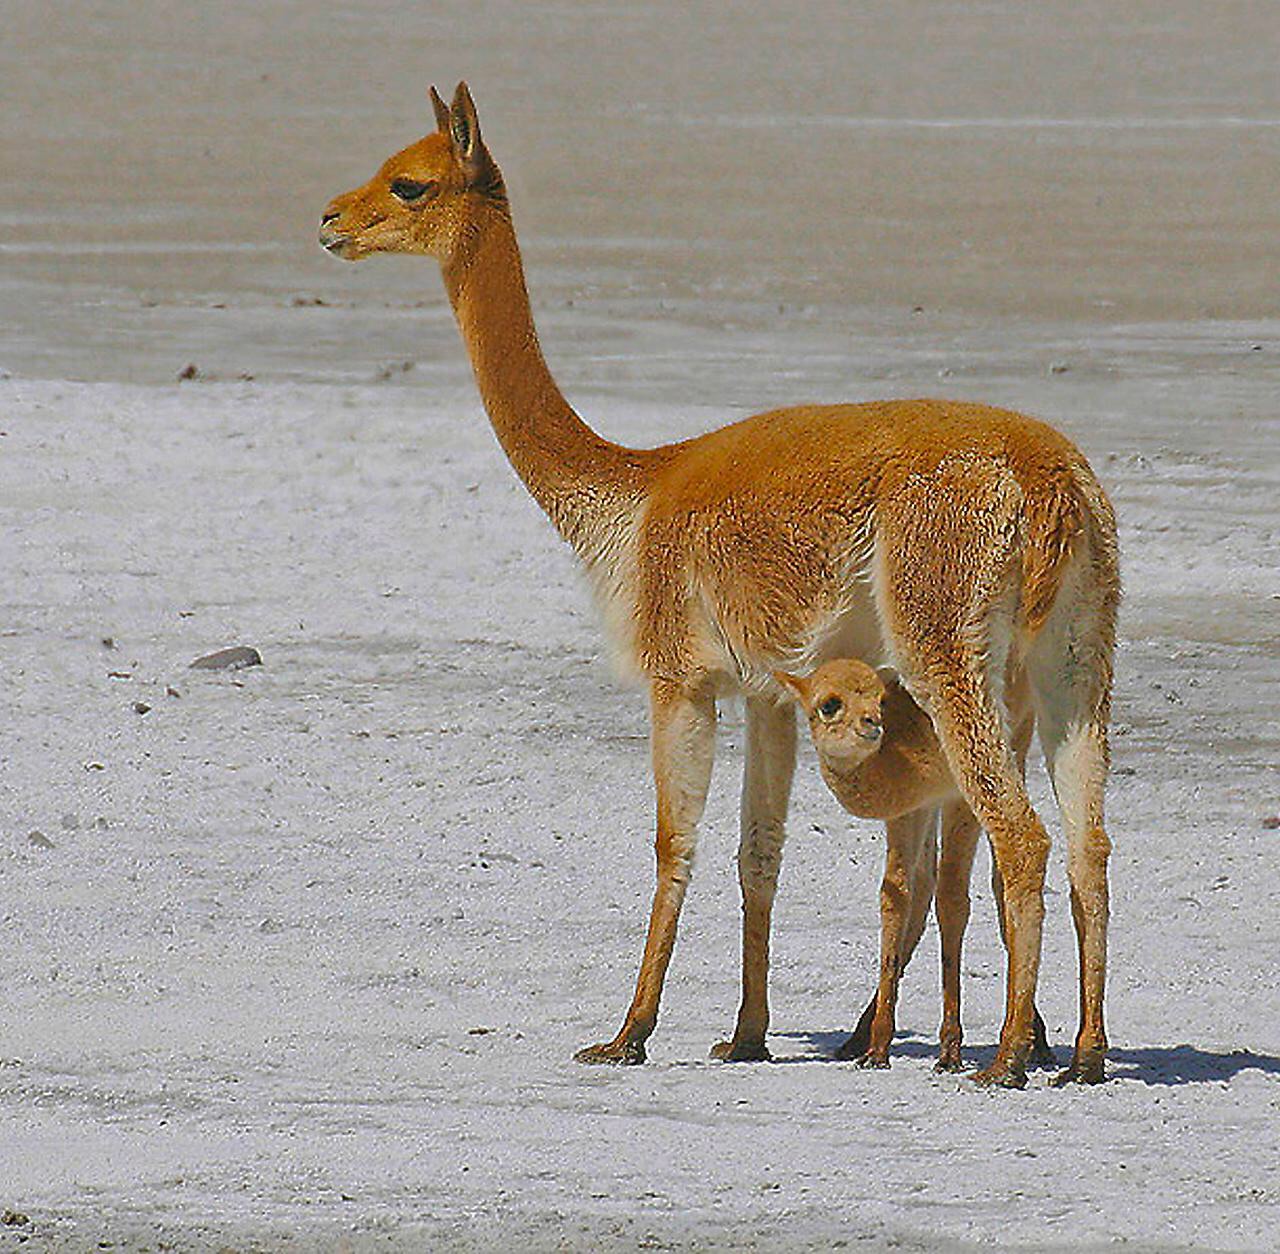 Saving the vicuña to save the people of the Andes